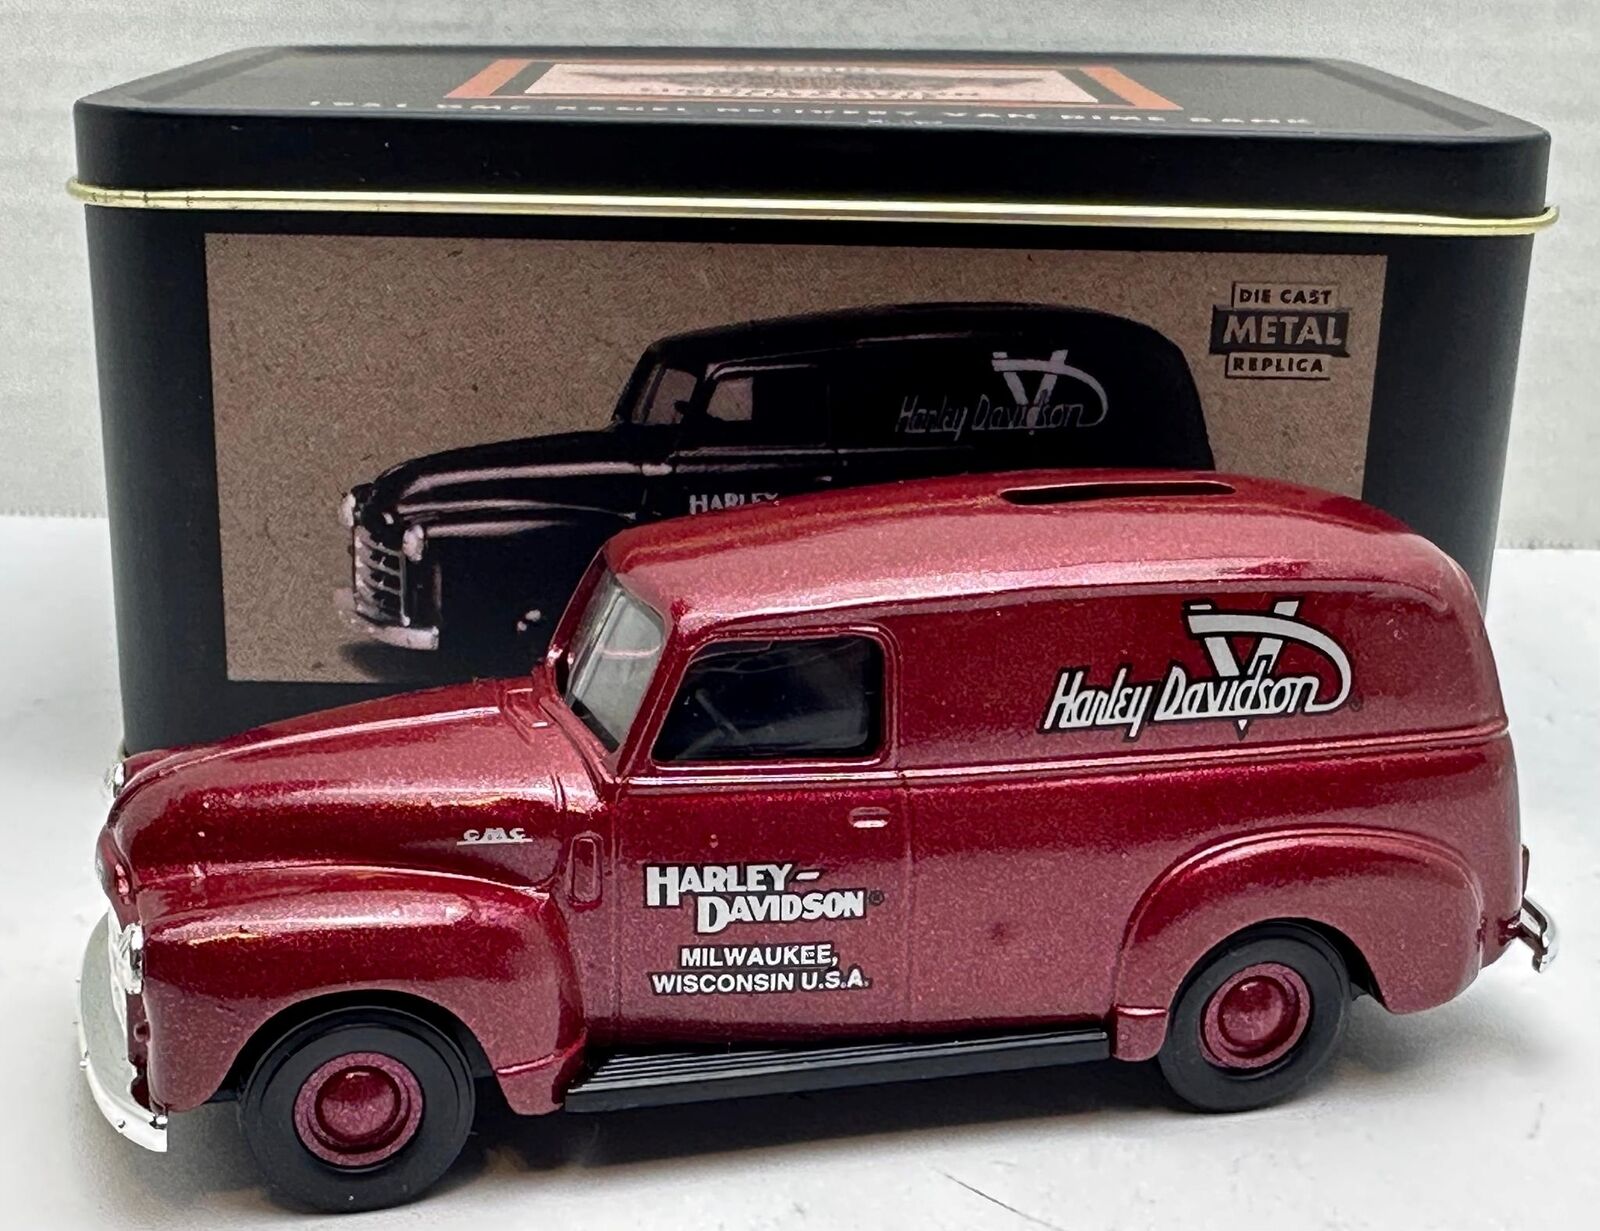 Harley Davidson 1951 GMC Panel Delivery Van Dime Bank 1:43 Scale Diecast